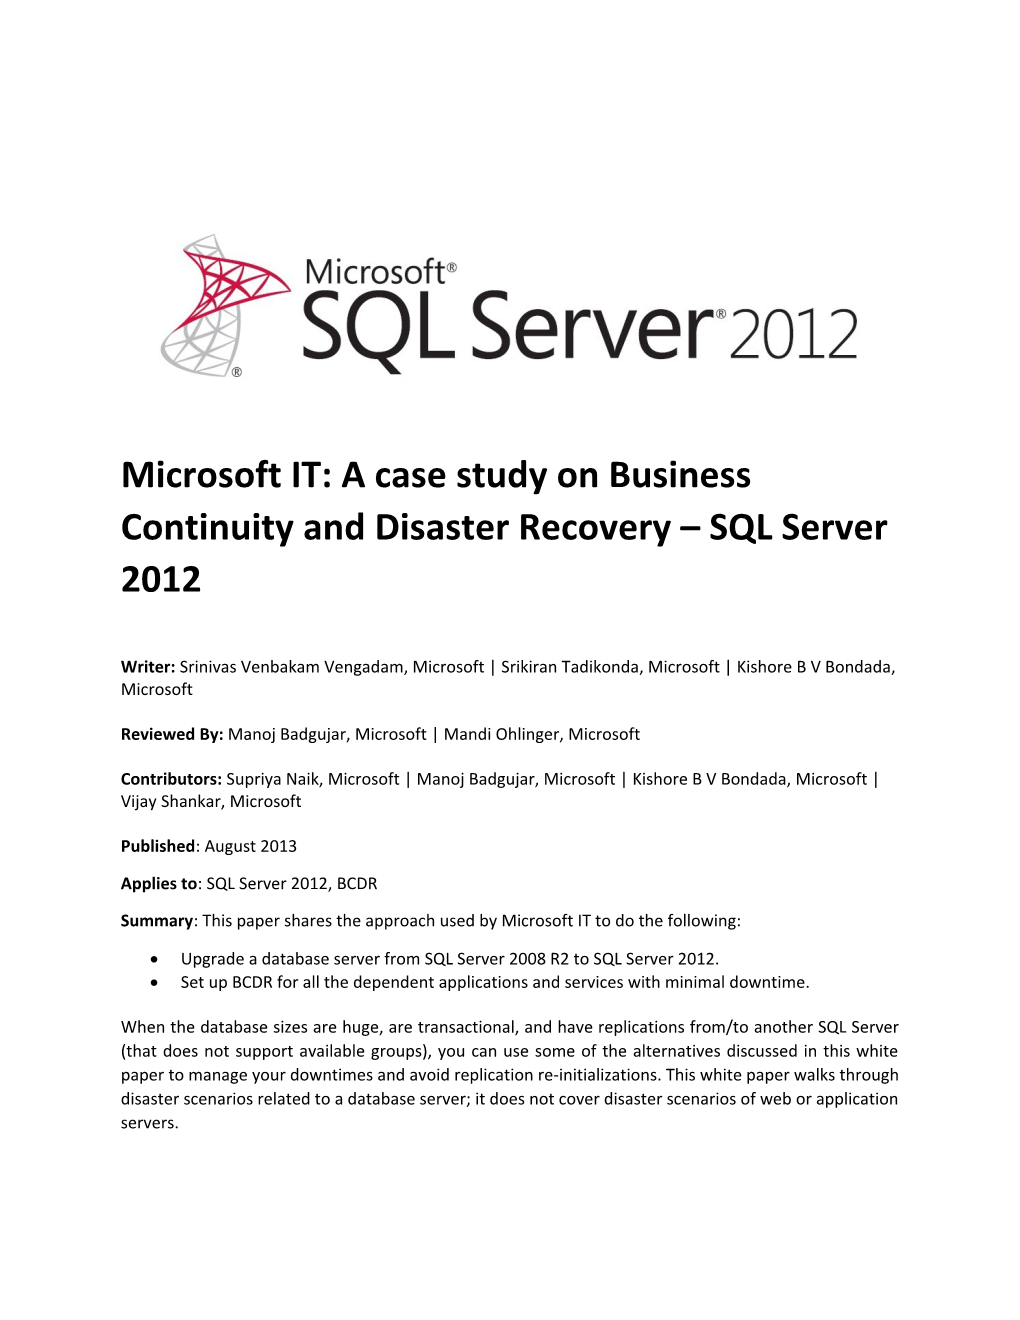 Microsoft IT: a Case Study on Business Continuity and Disaster Recovery SQL Server 2012